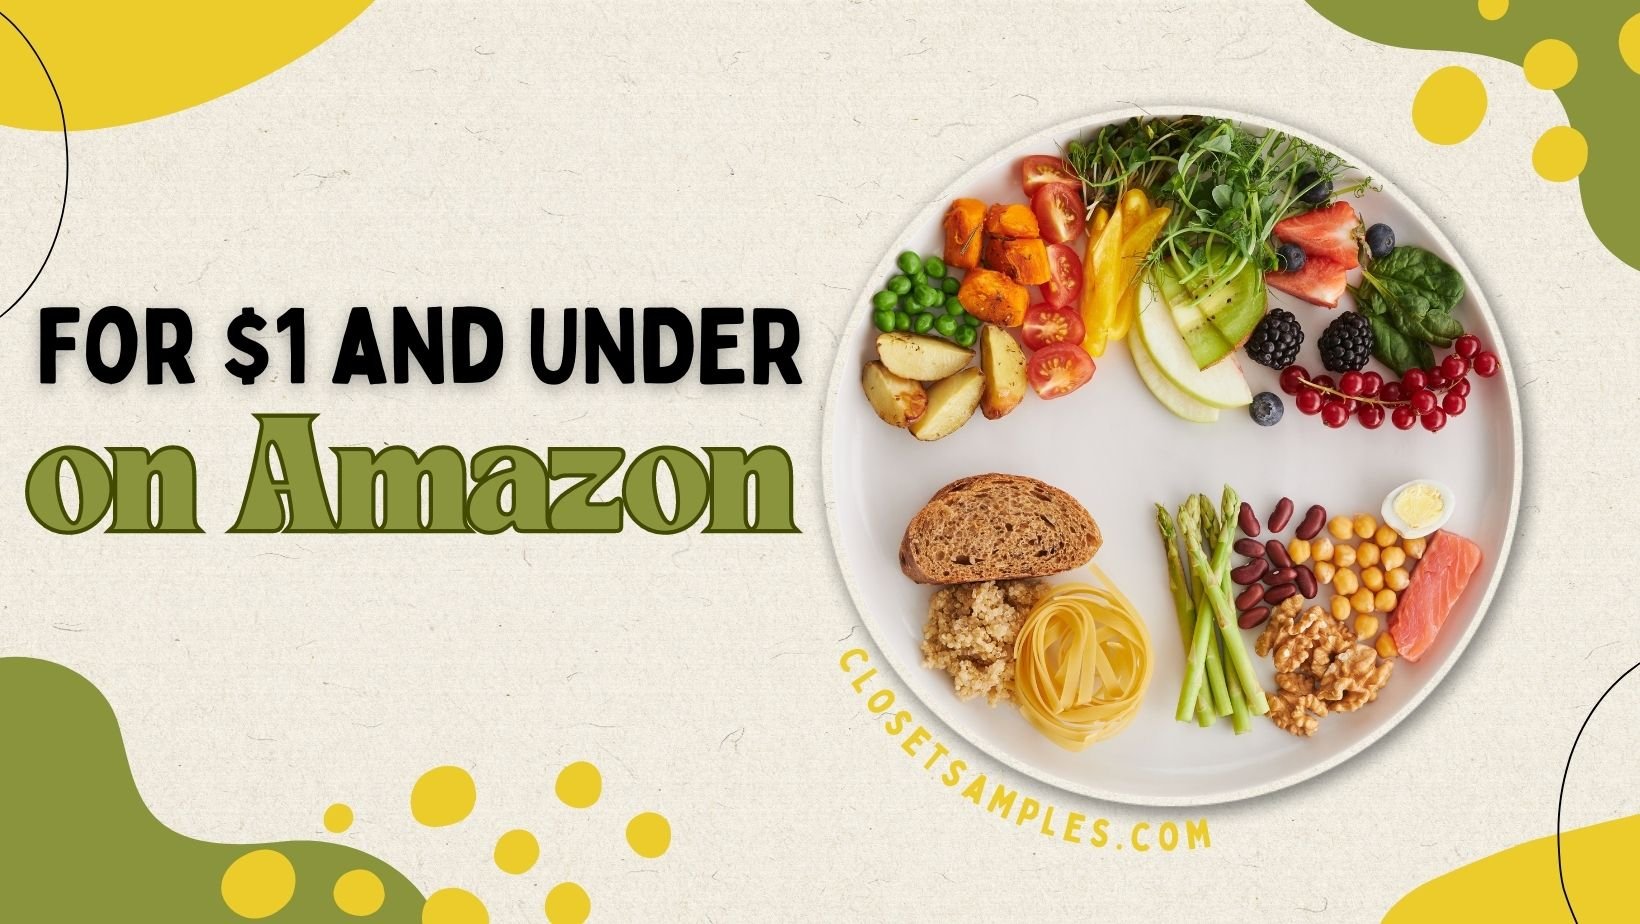 Food $1 and UNDER on Amazon!